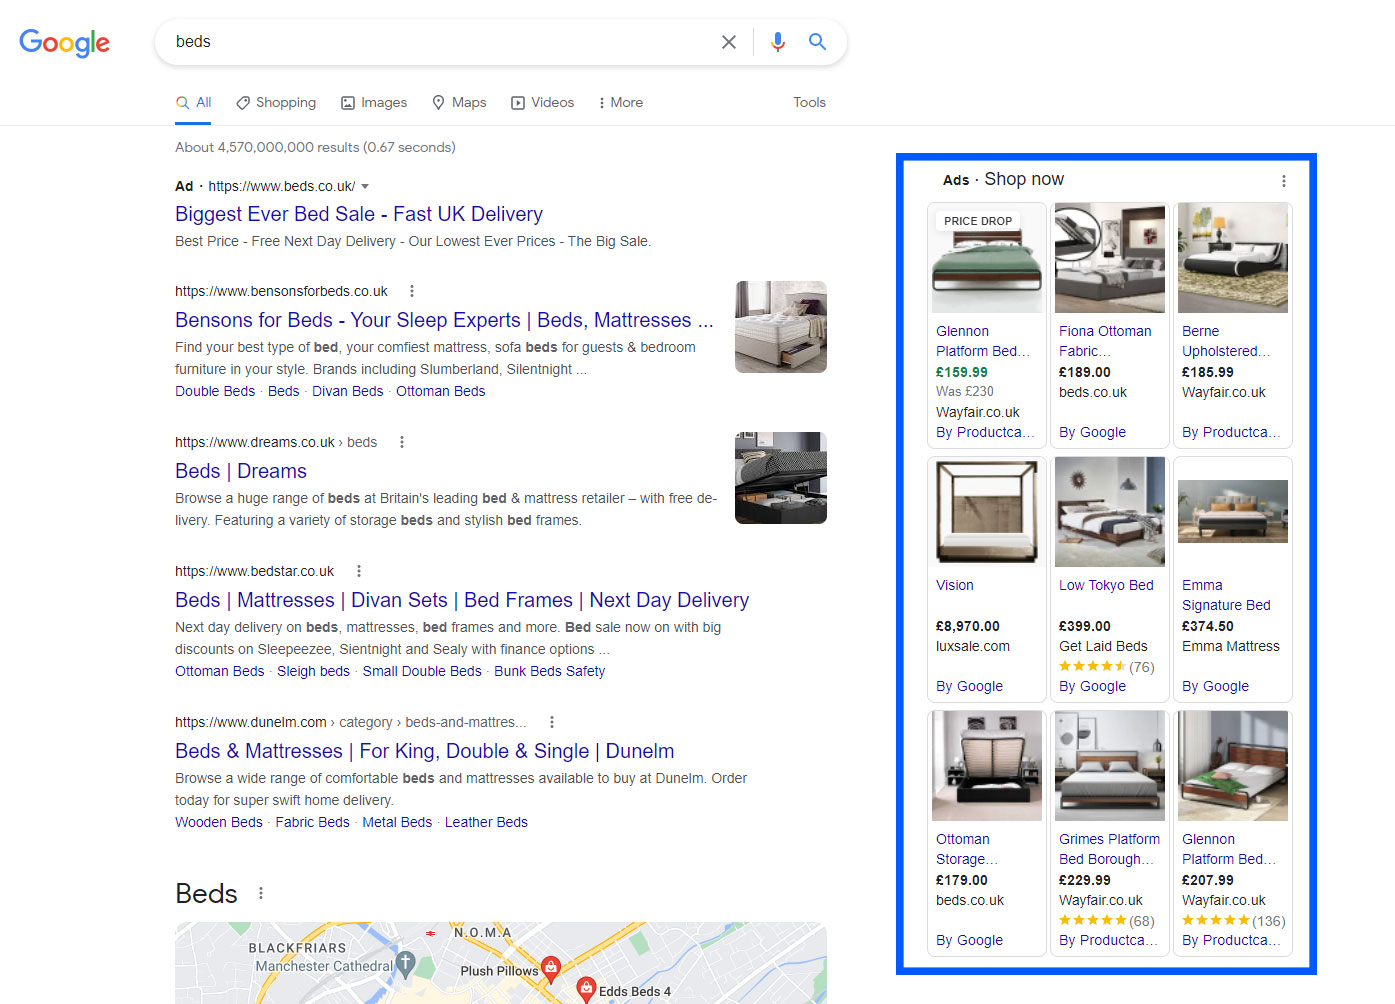 Example of Google Shopping listings appearing on search results